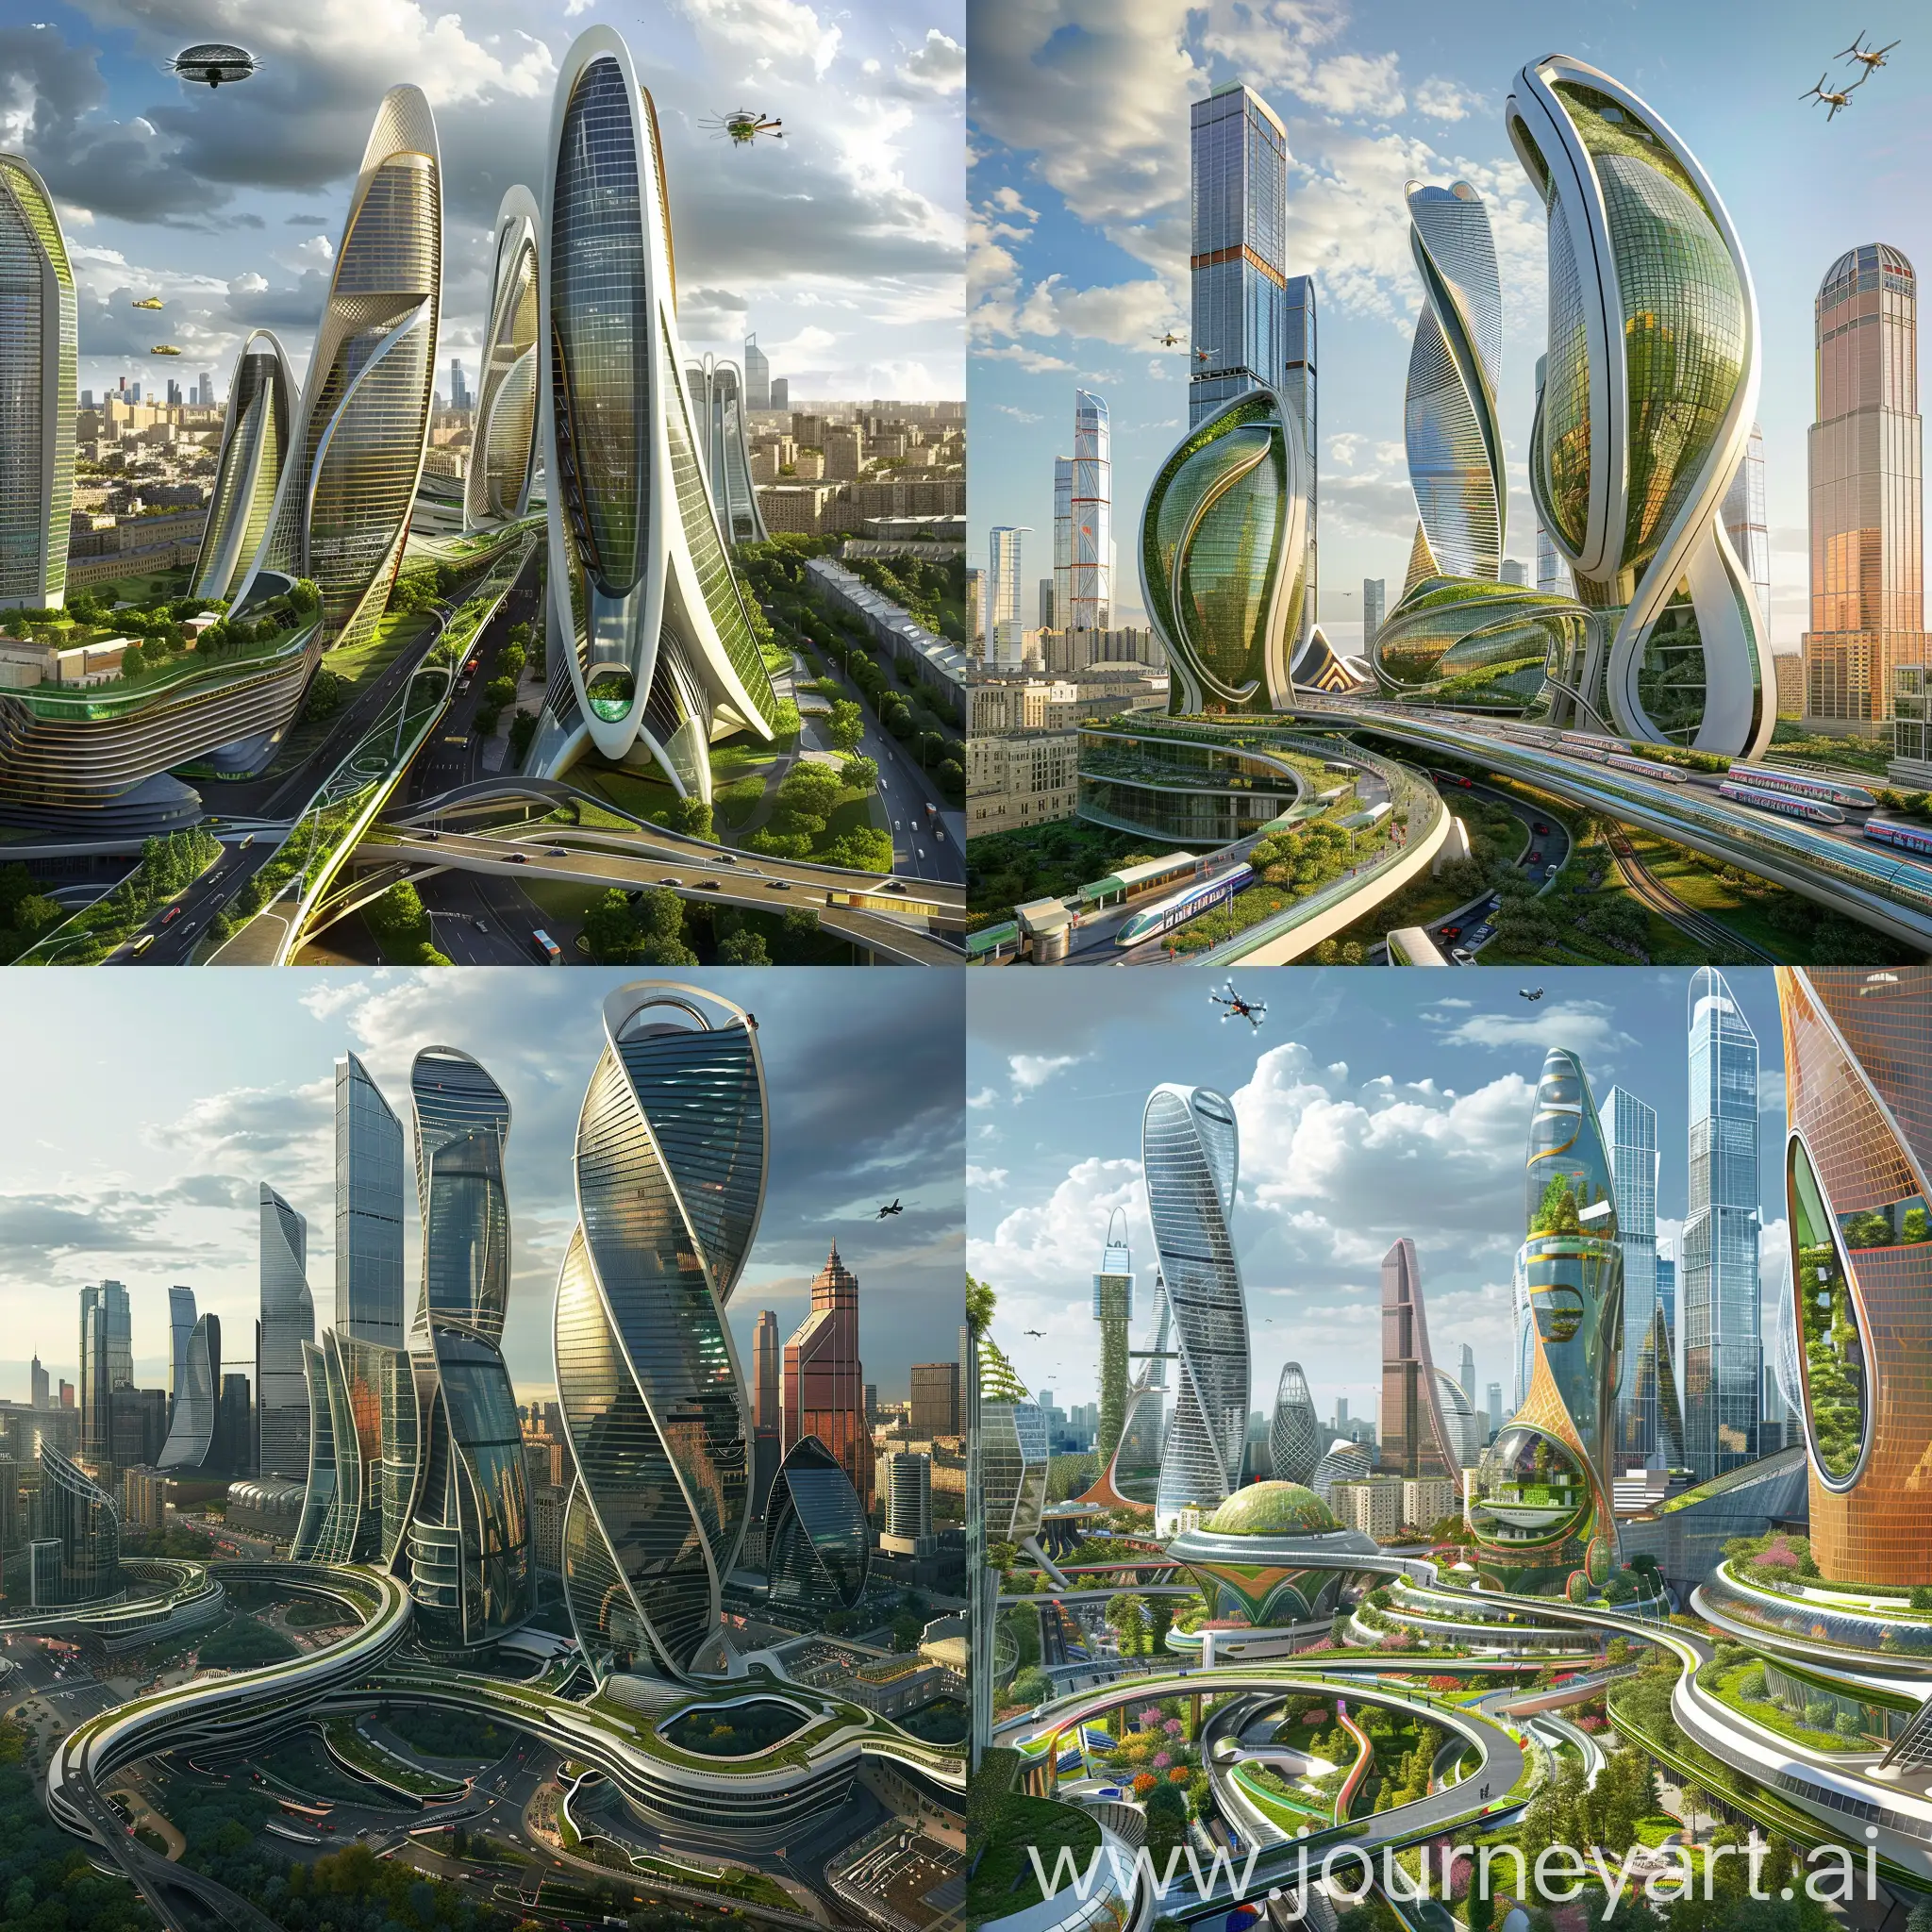 Futuristic-Moscow-Dynamic-Skyscrapers-and-Smart-Green-Spaces